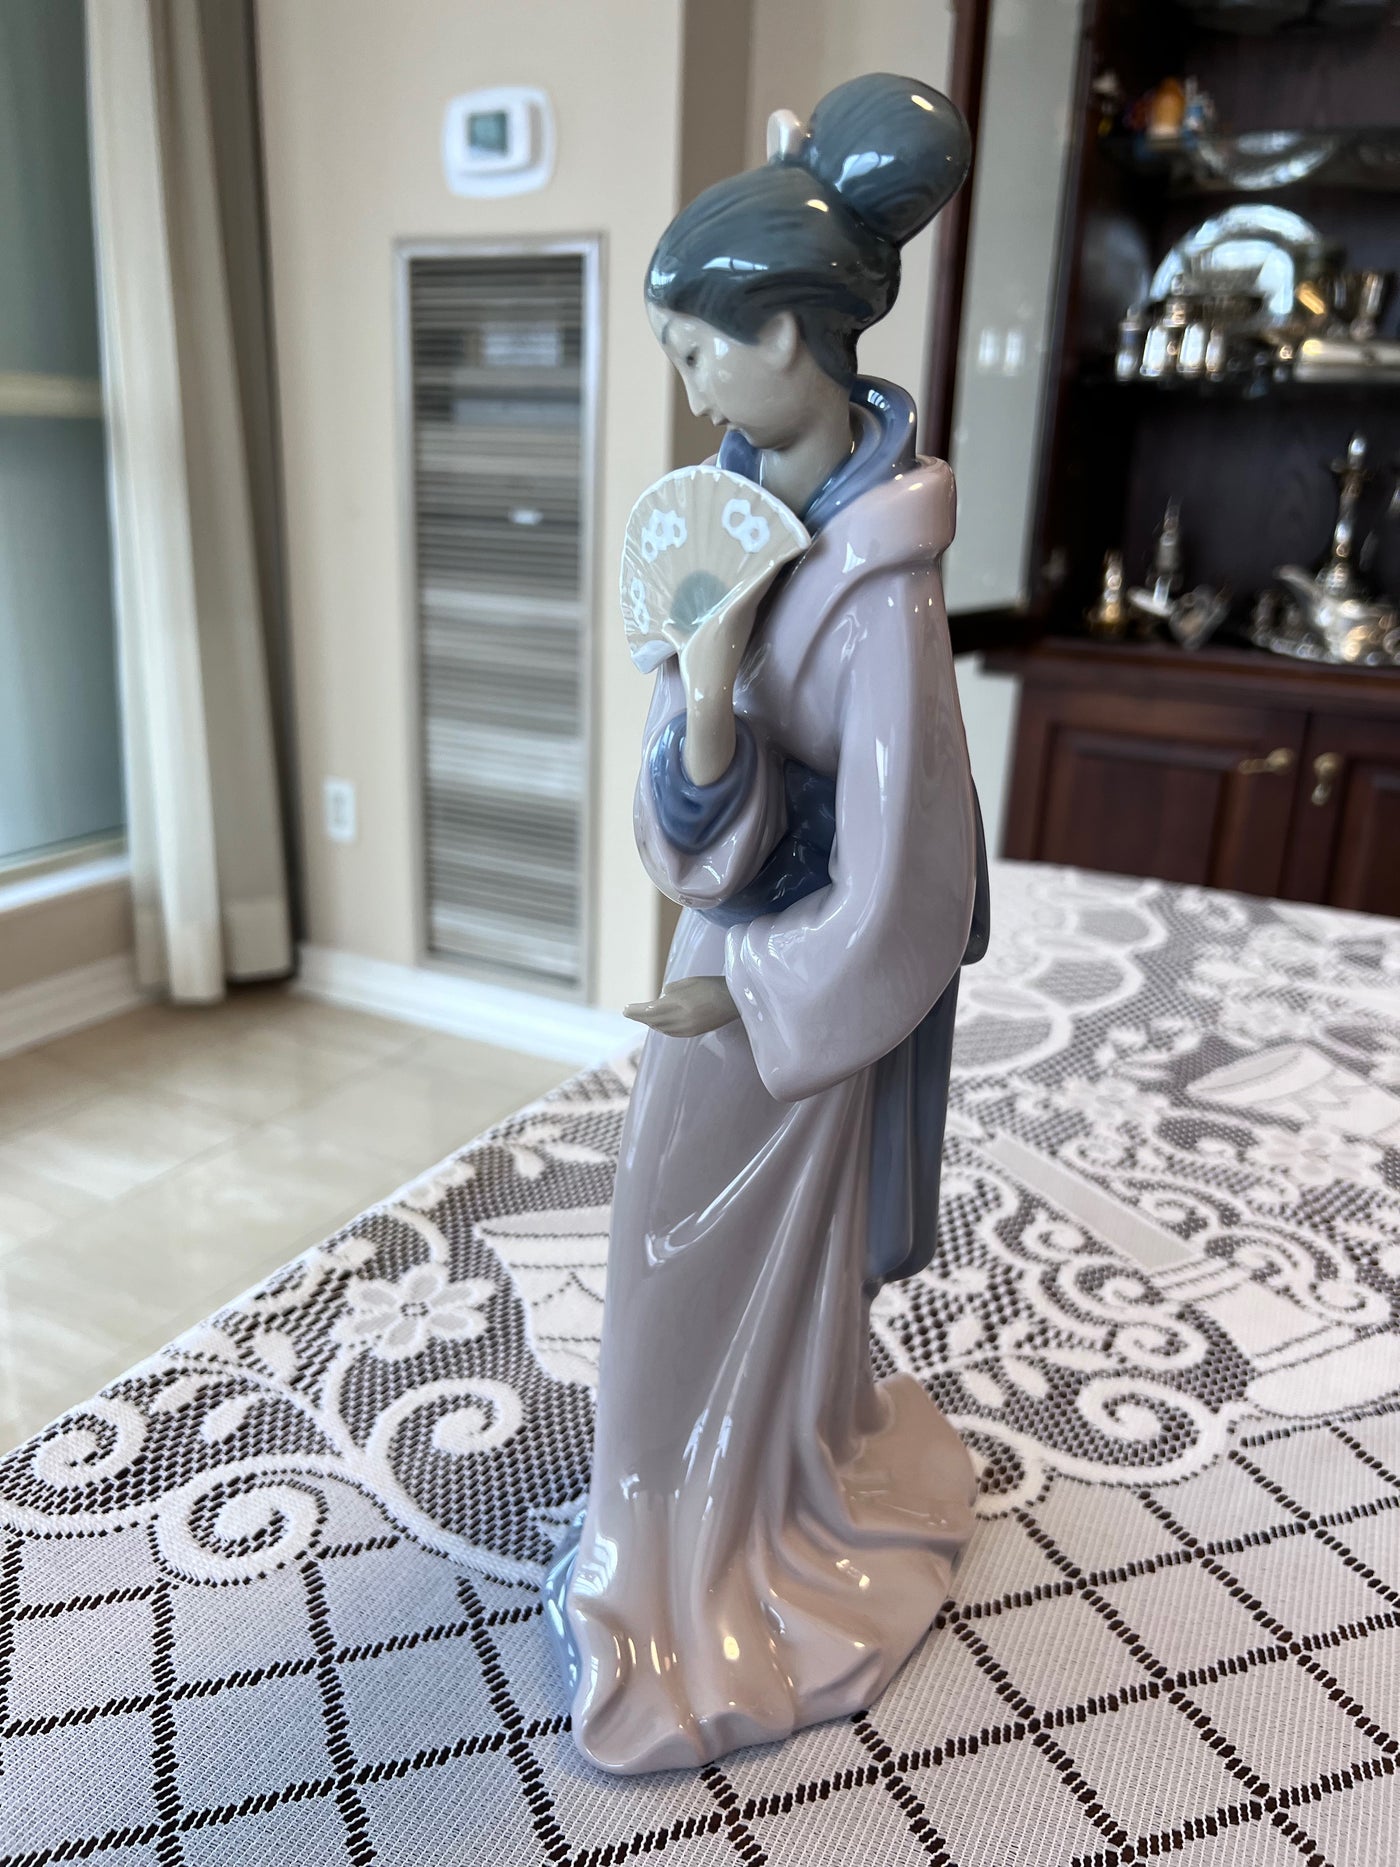 LLADRO NAO MADAME BUTTERFLY GEISHA FAN GIRL FIGURINE – Sell My Stuff Canada  - Canada's Content and Estate Sale Specialists